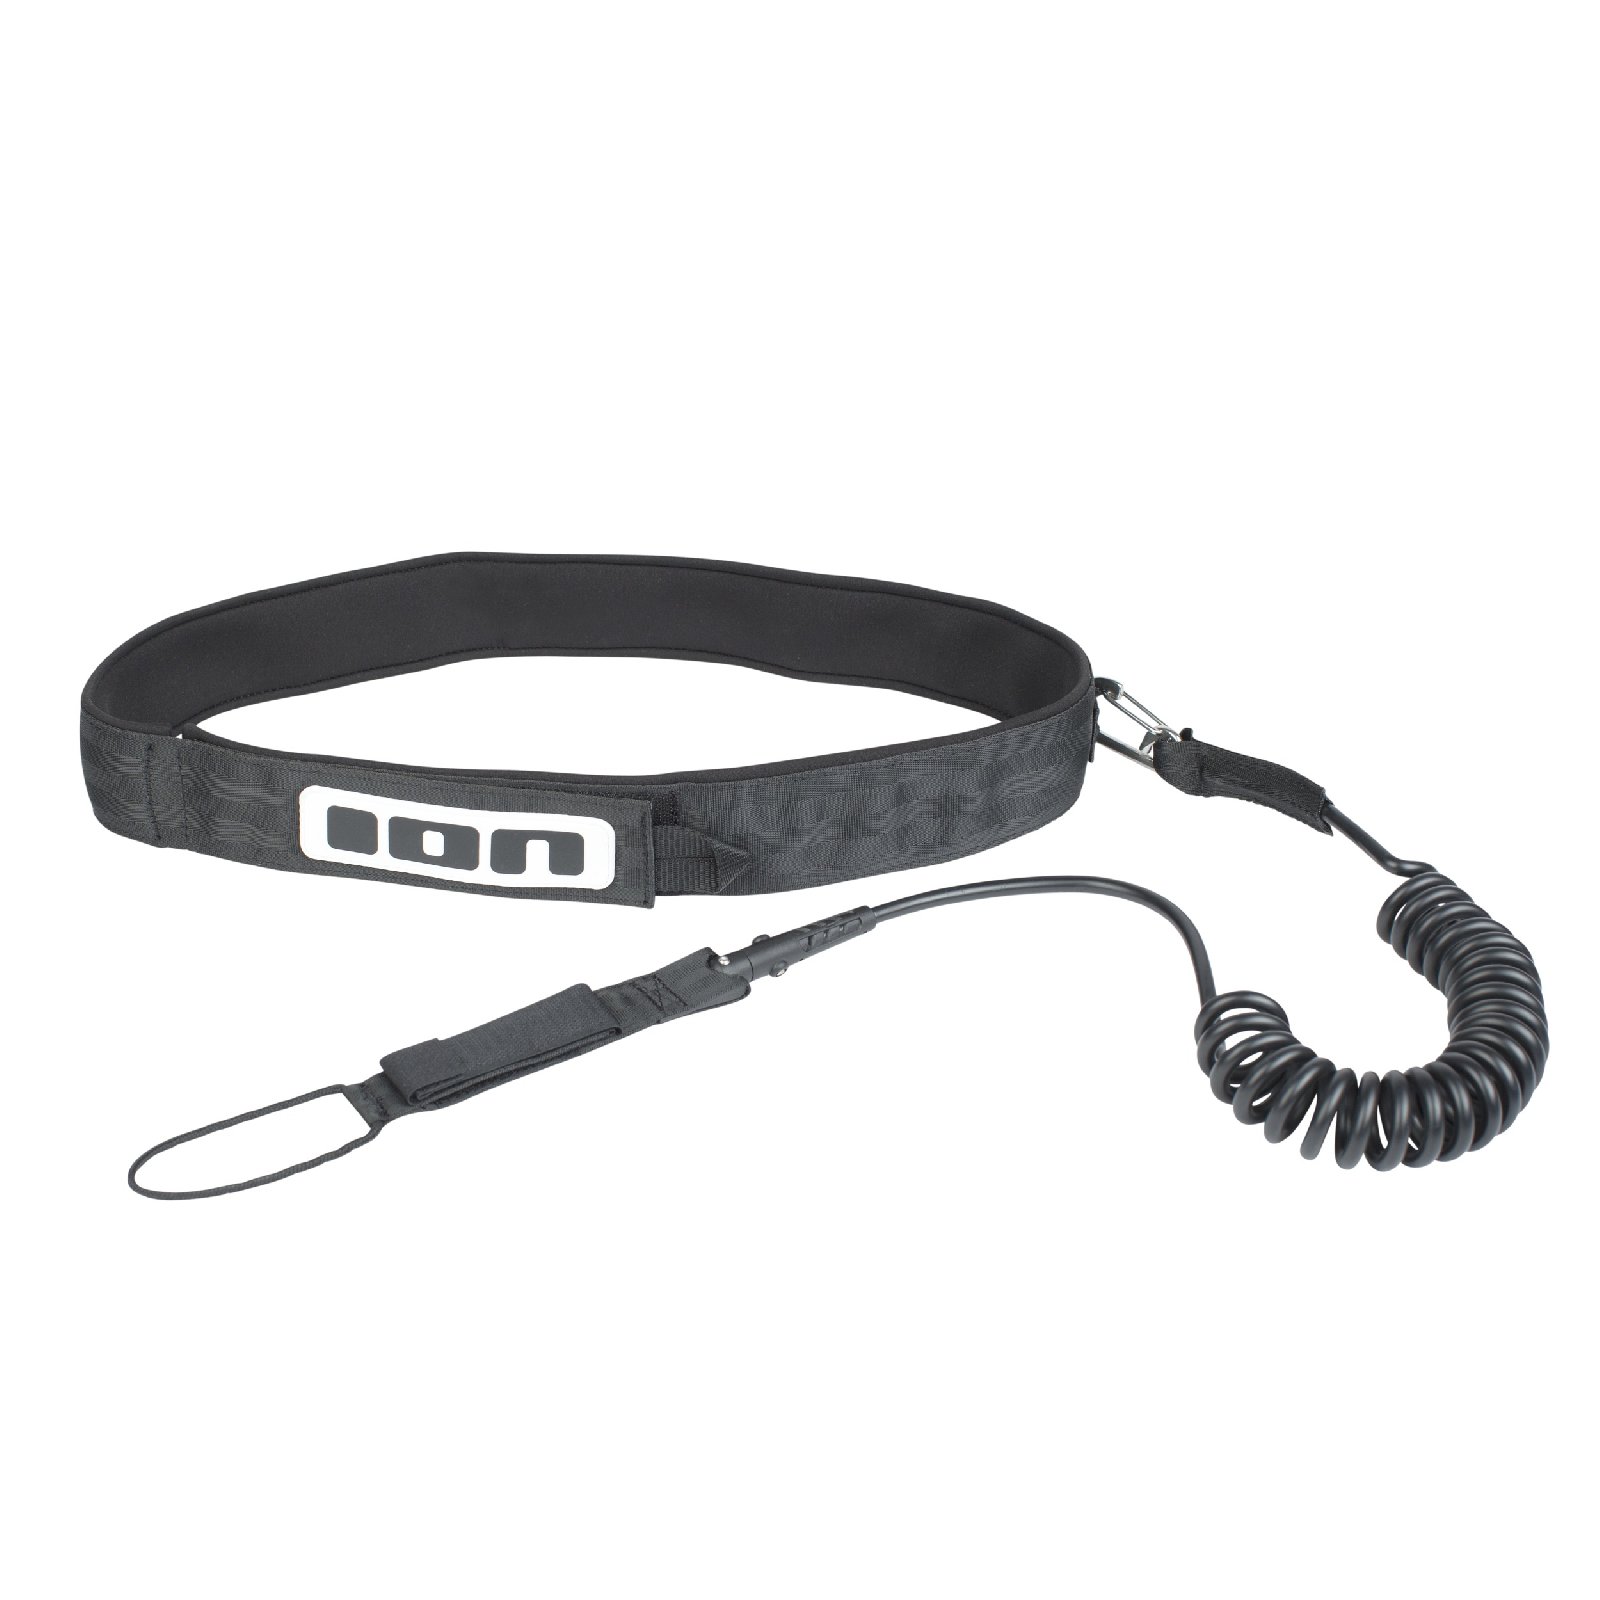 ION  SUP/WING Core Leash coiled hipbelt 10'  (48700-7052)  23-